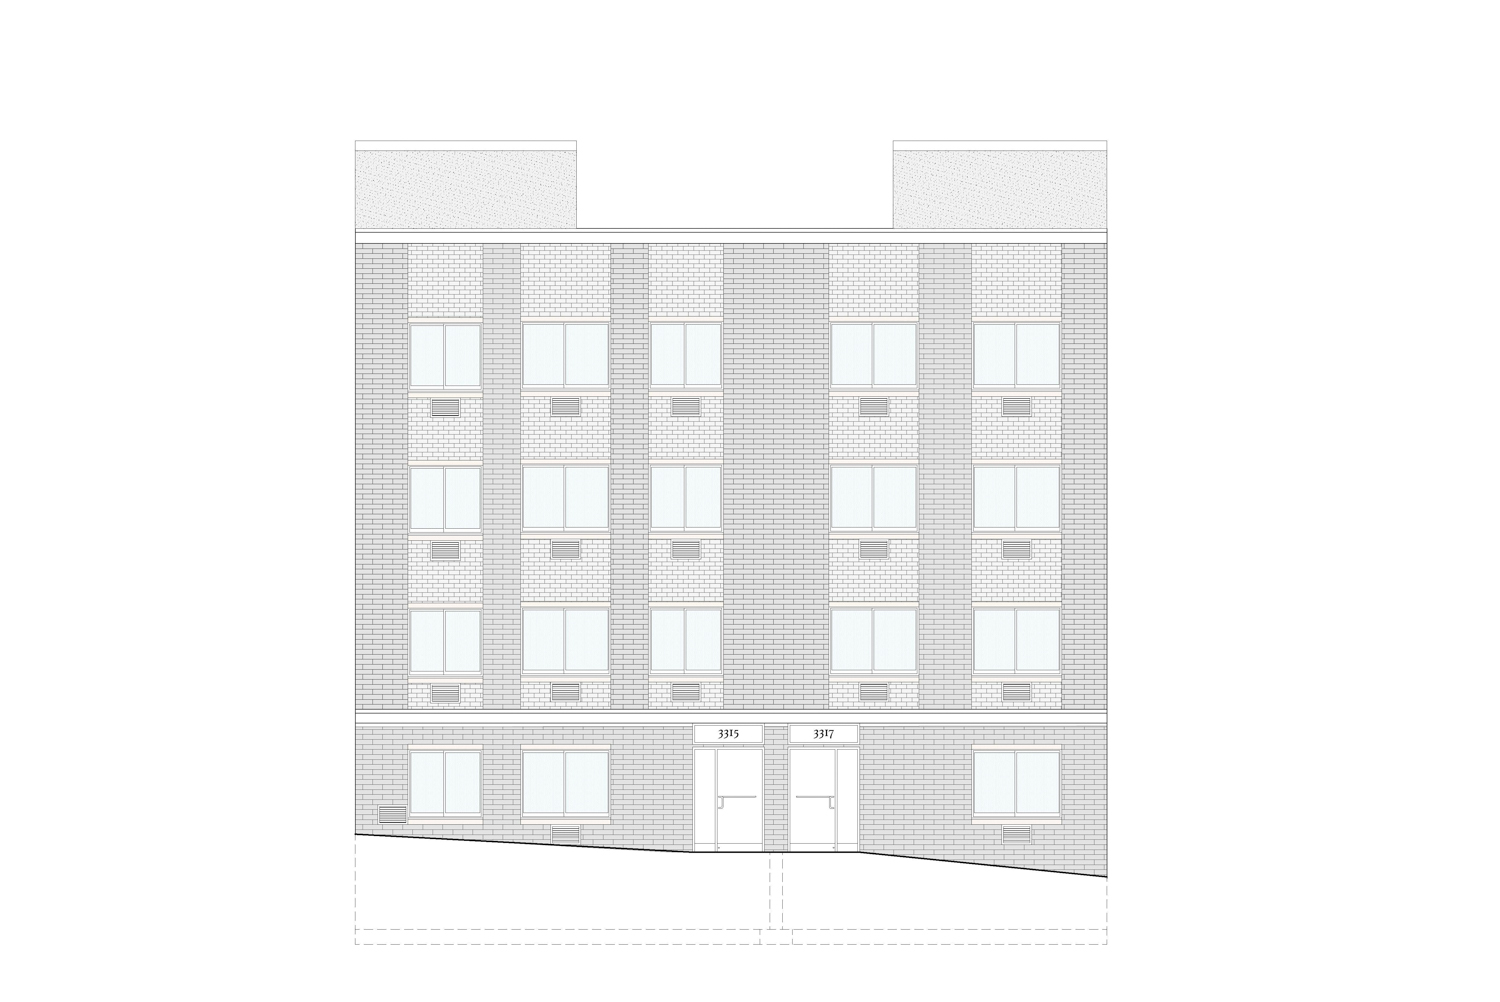 3315-3317 Parkside Avenue, rendering by Badaly Architects